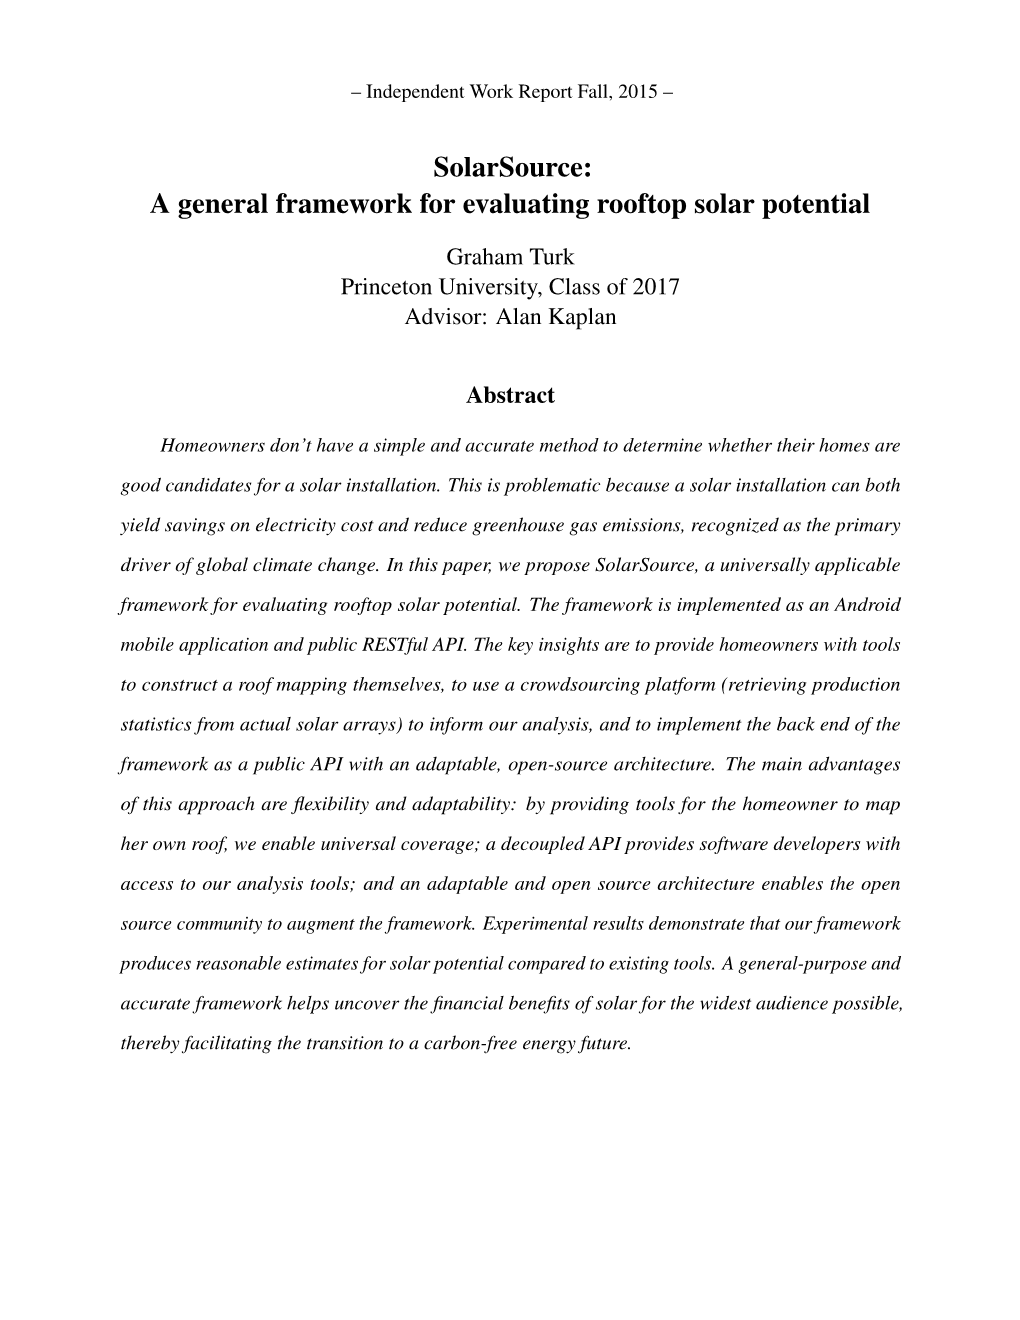 Solarsource: a General Framework for Evaluating Rooftop Solar Potential